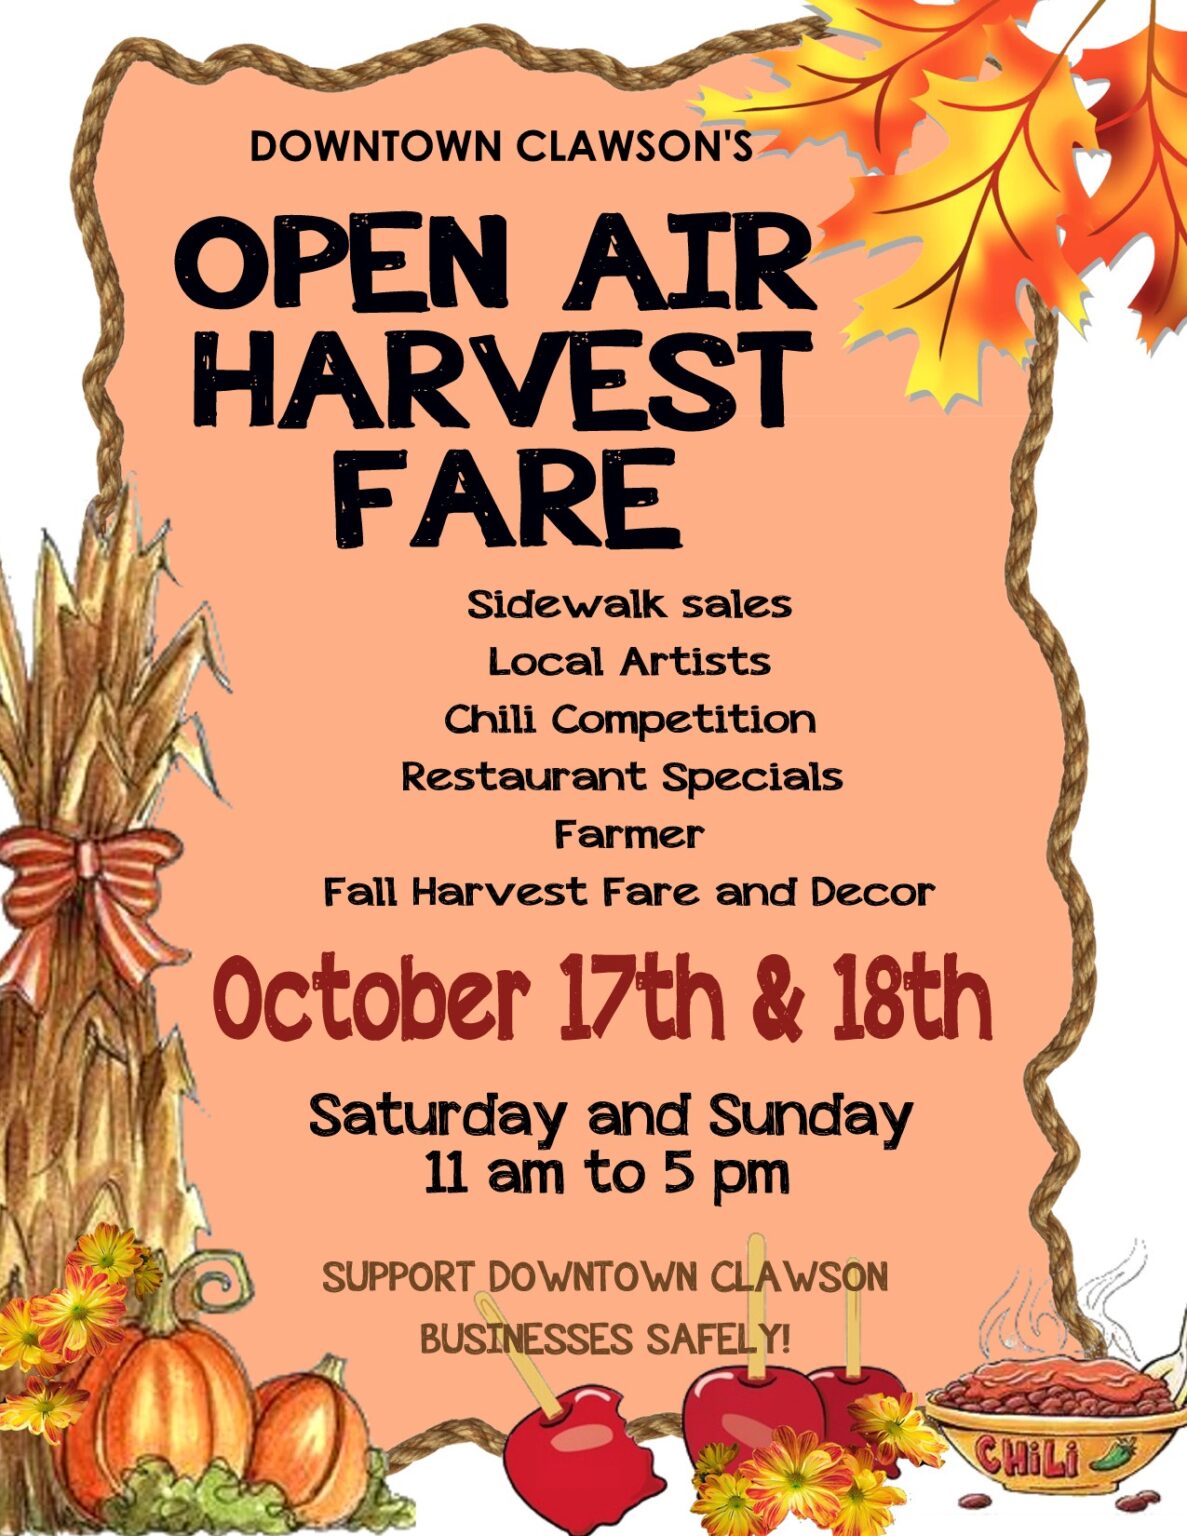 Open Air Harvest Fare Downtown Clawson